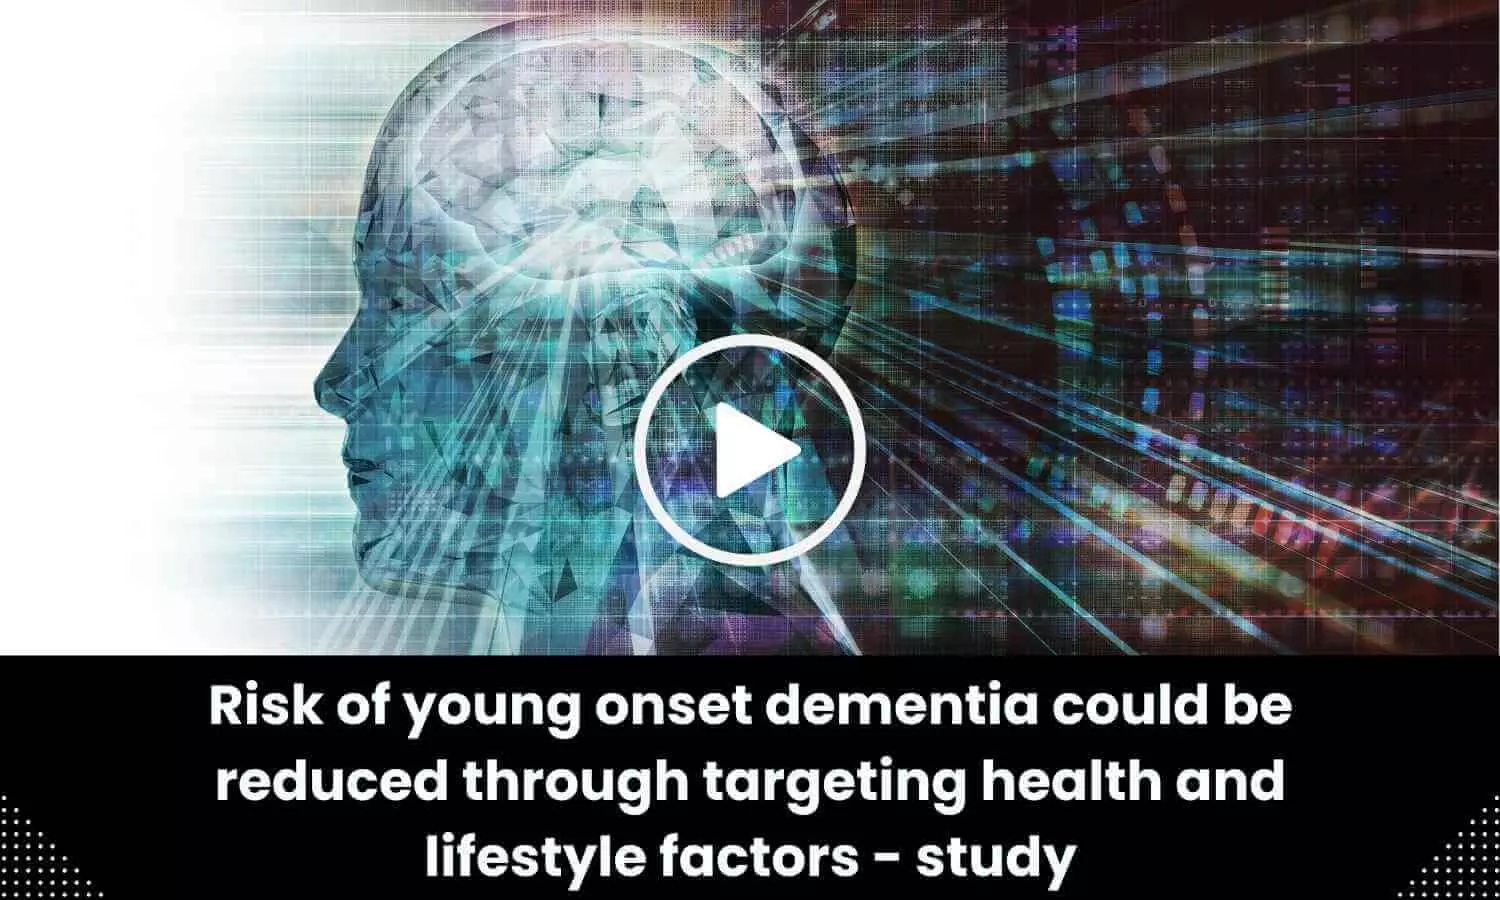 Risk of young onset dementia could be reduced through targeting health and lifestyle factors - study